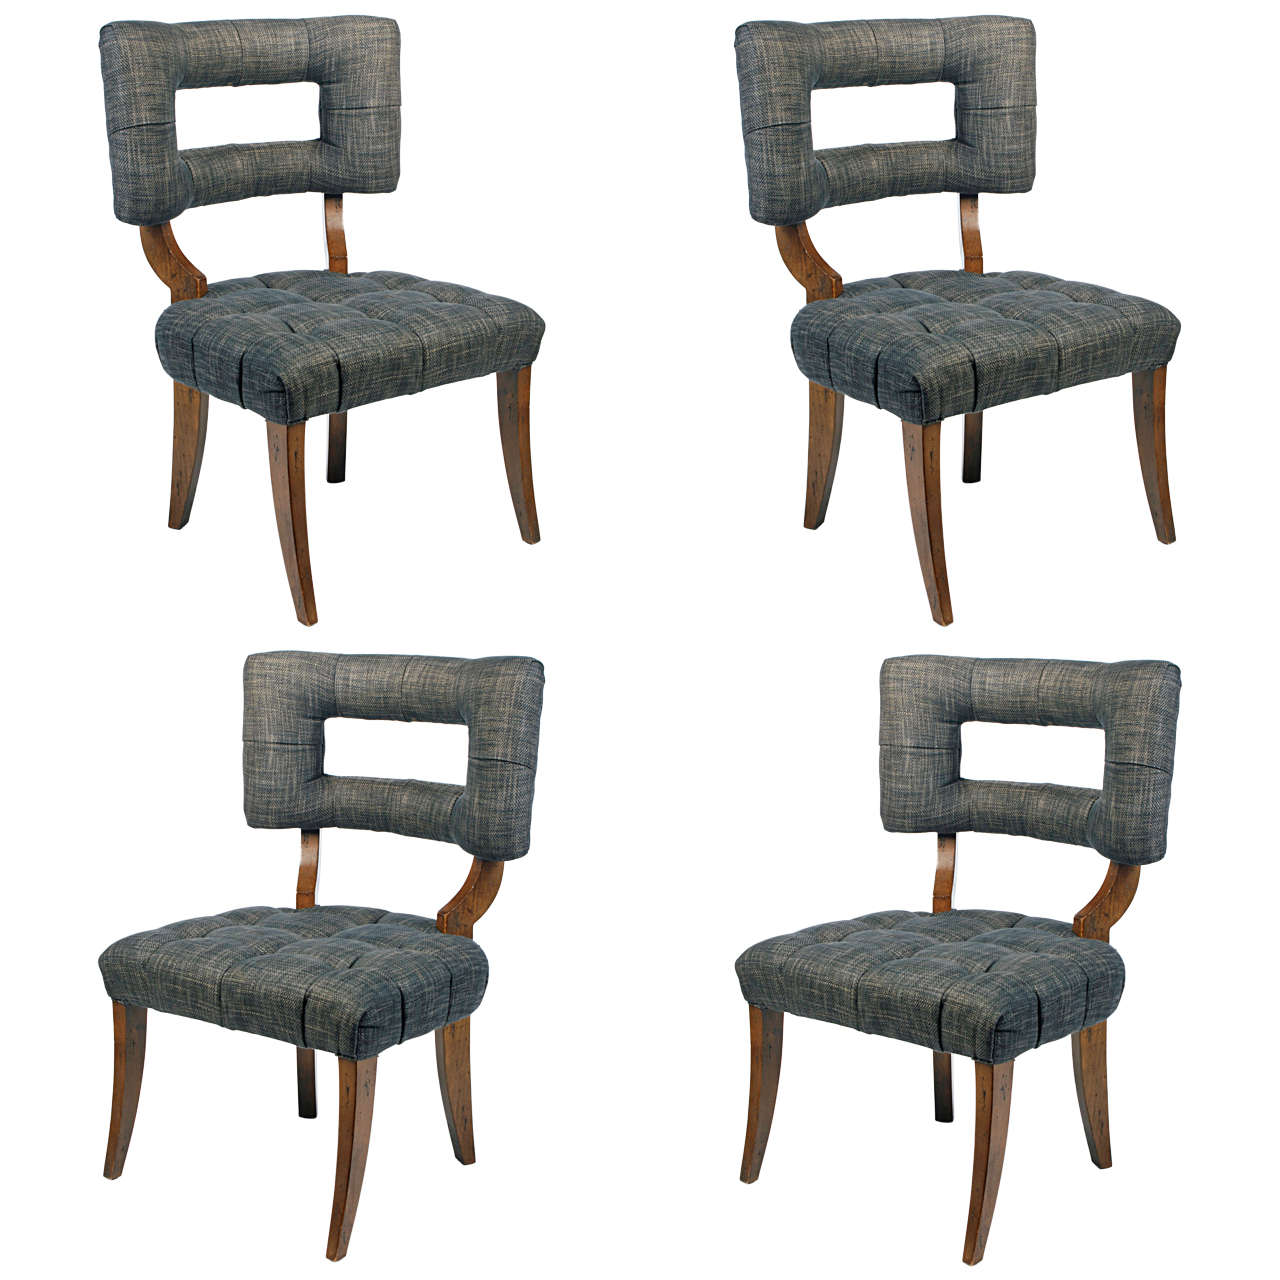 Set of Four William Haines Inspired Chairs